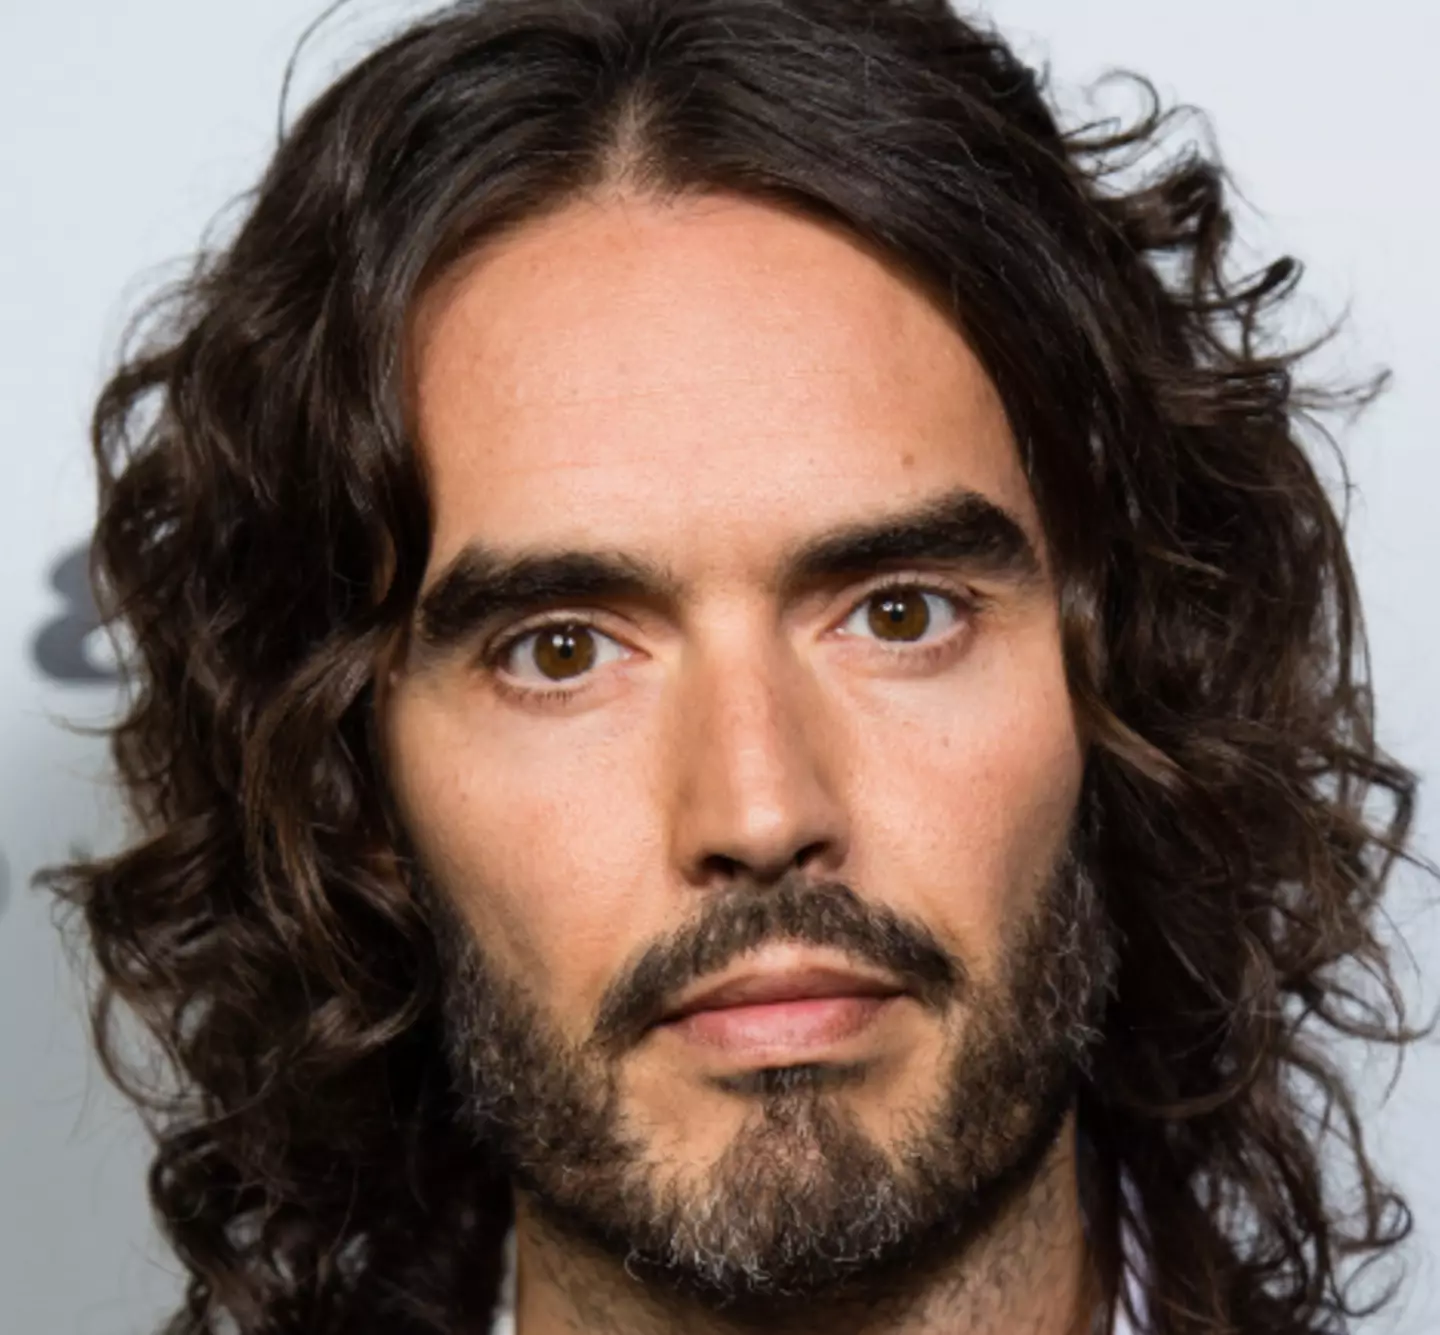 Multiple women have accused Russell Brand of inappropriate behaviour.